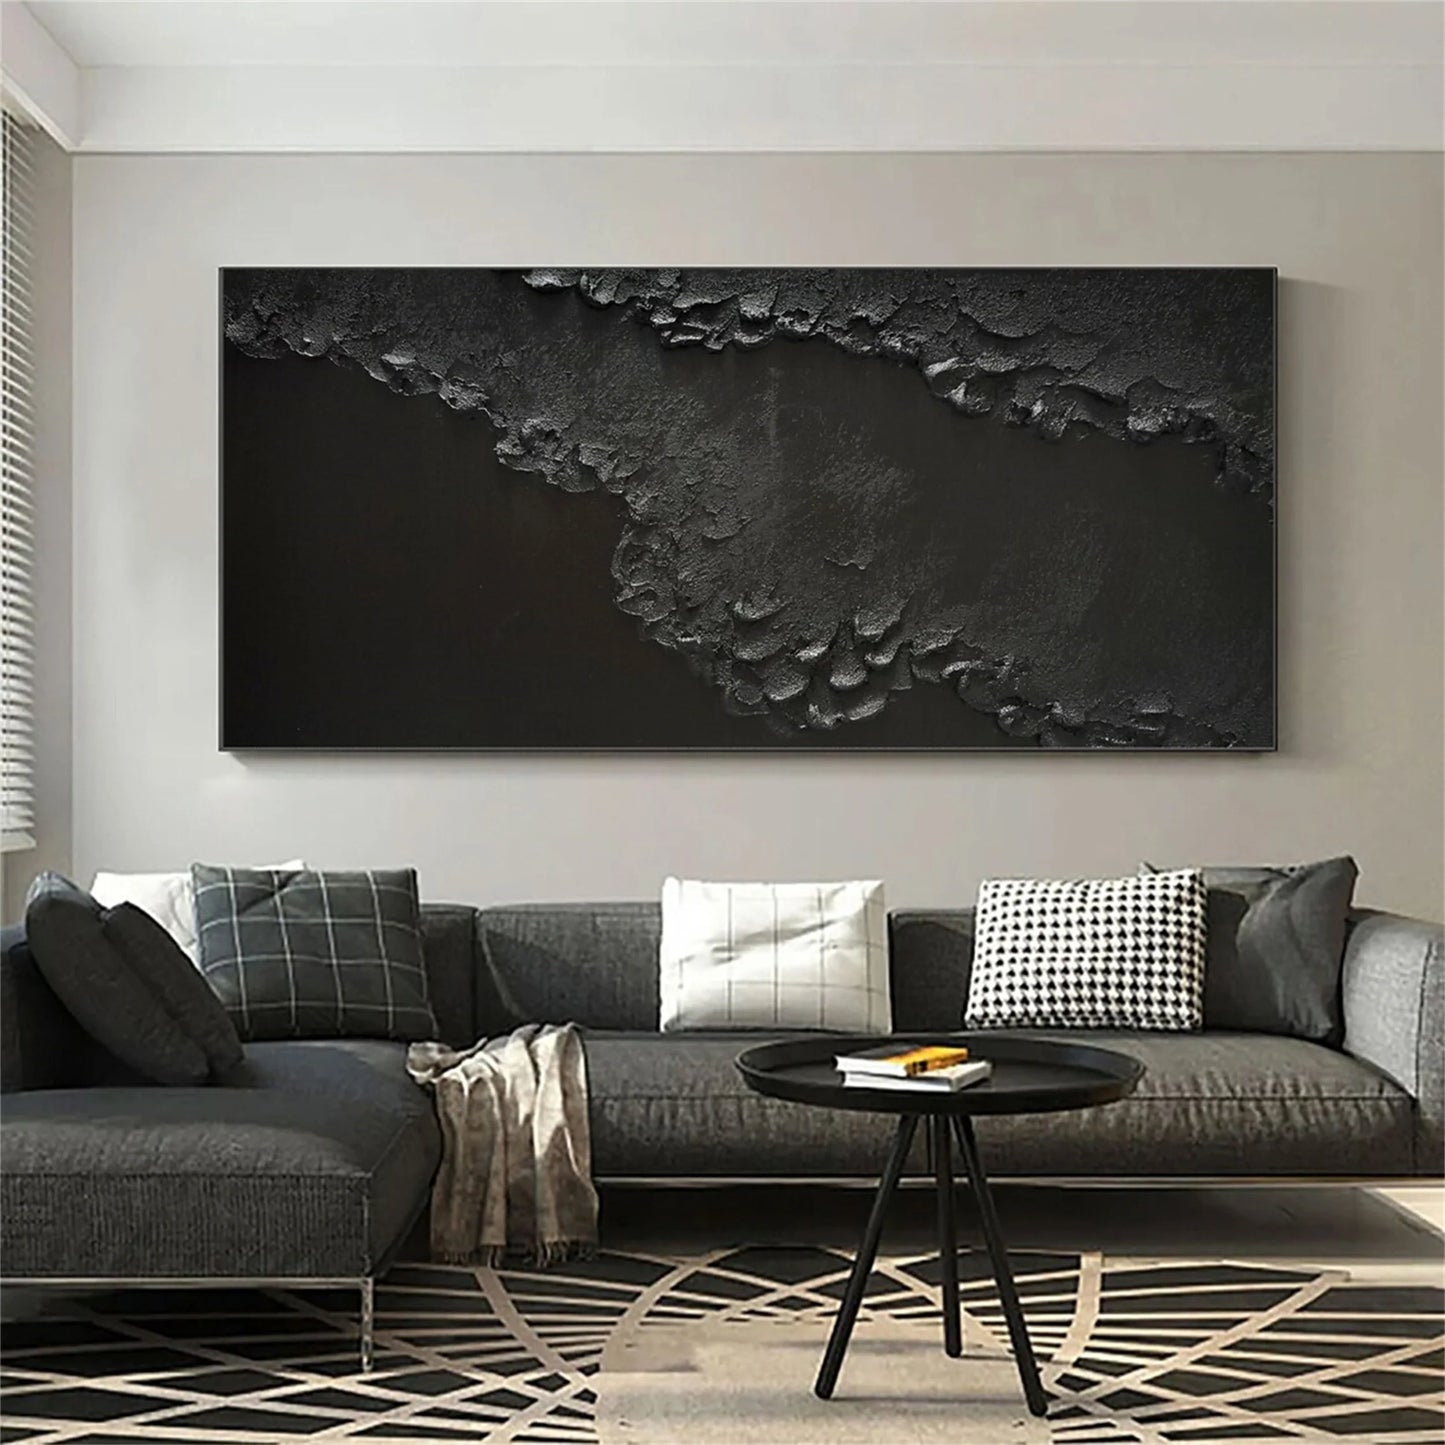 Ocean and Sky Painting "Edge of Night" 